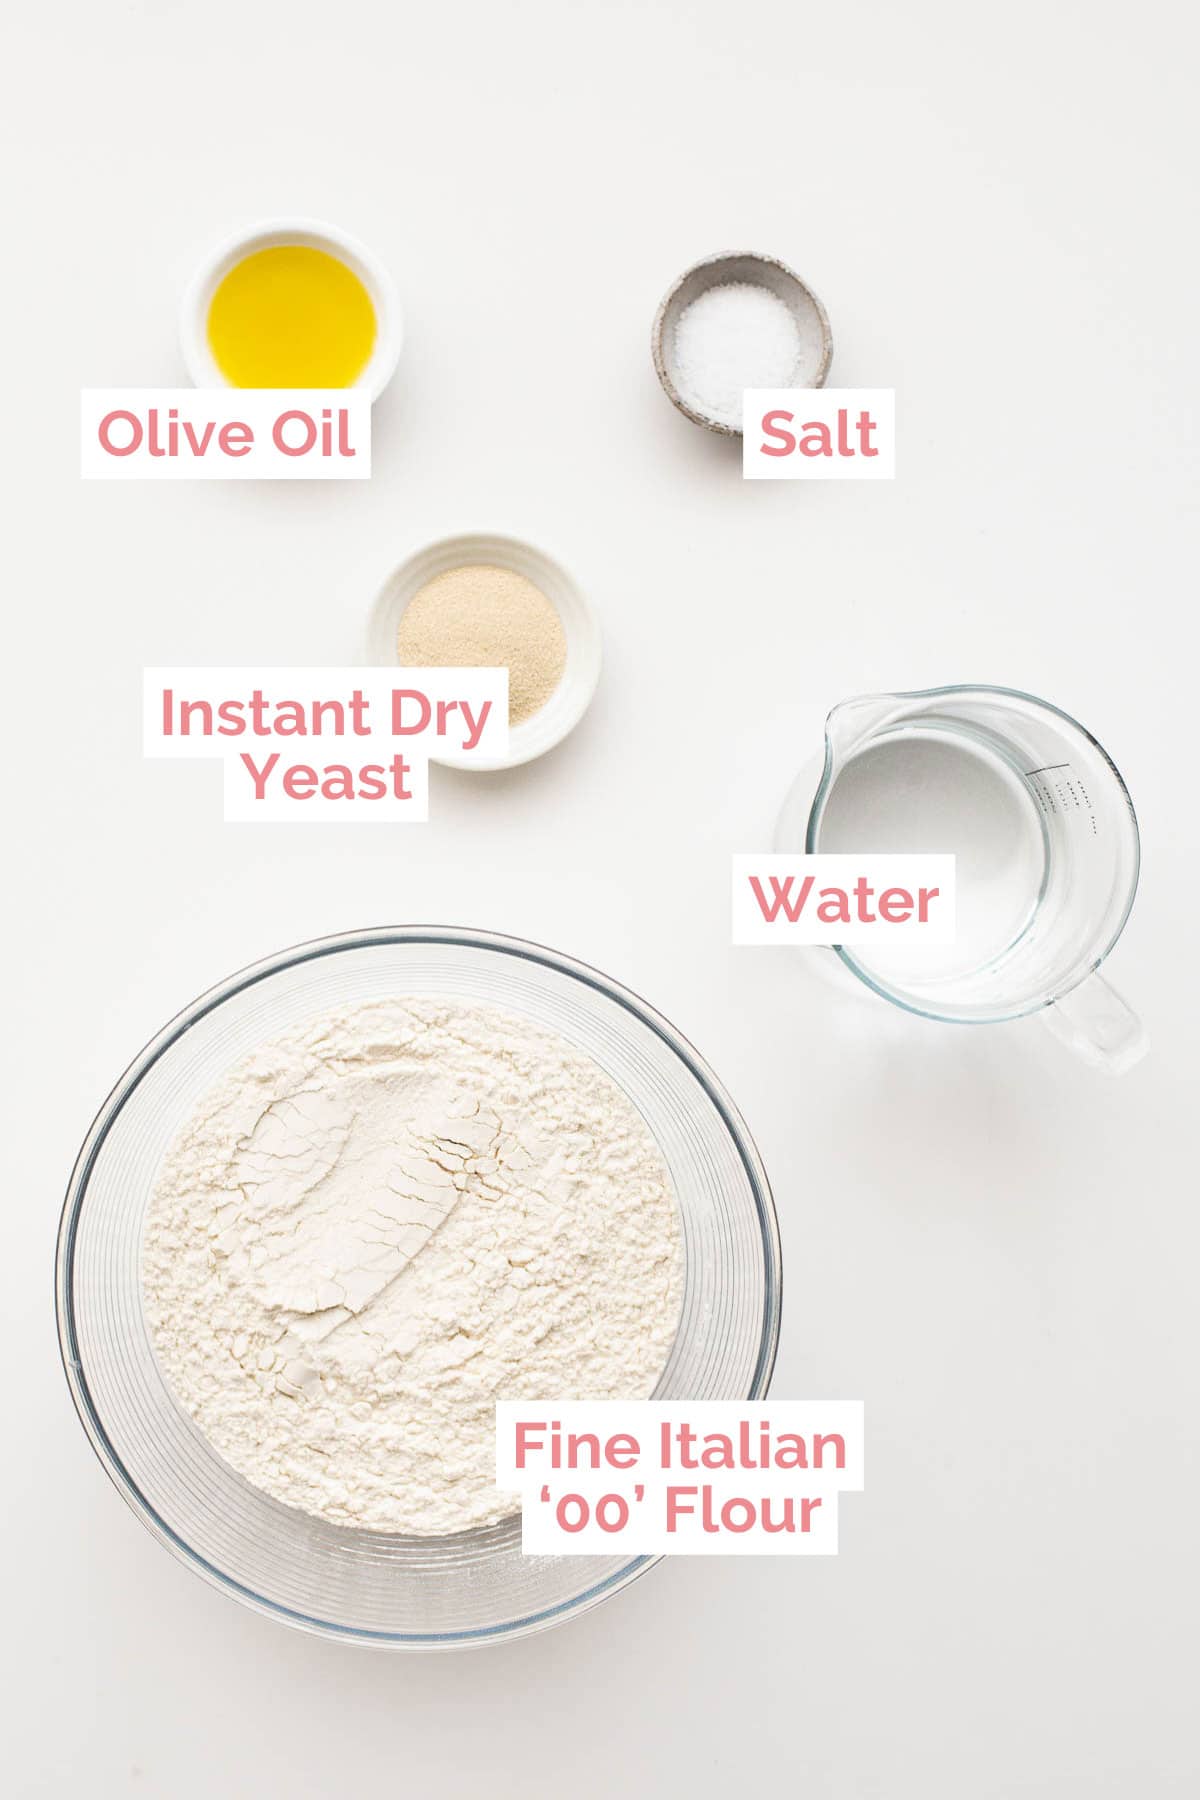 Ingredients laid out to make no-knead pizza.